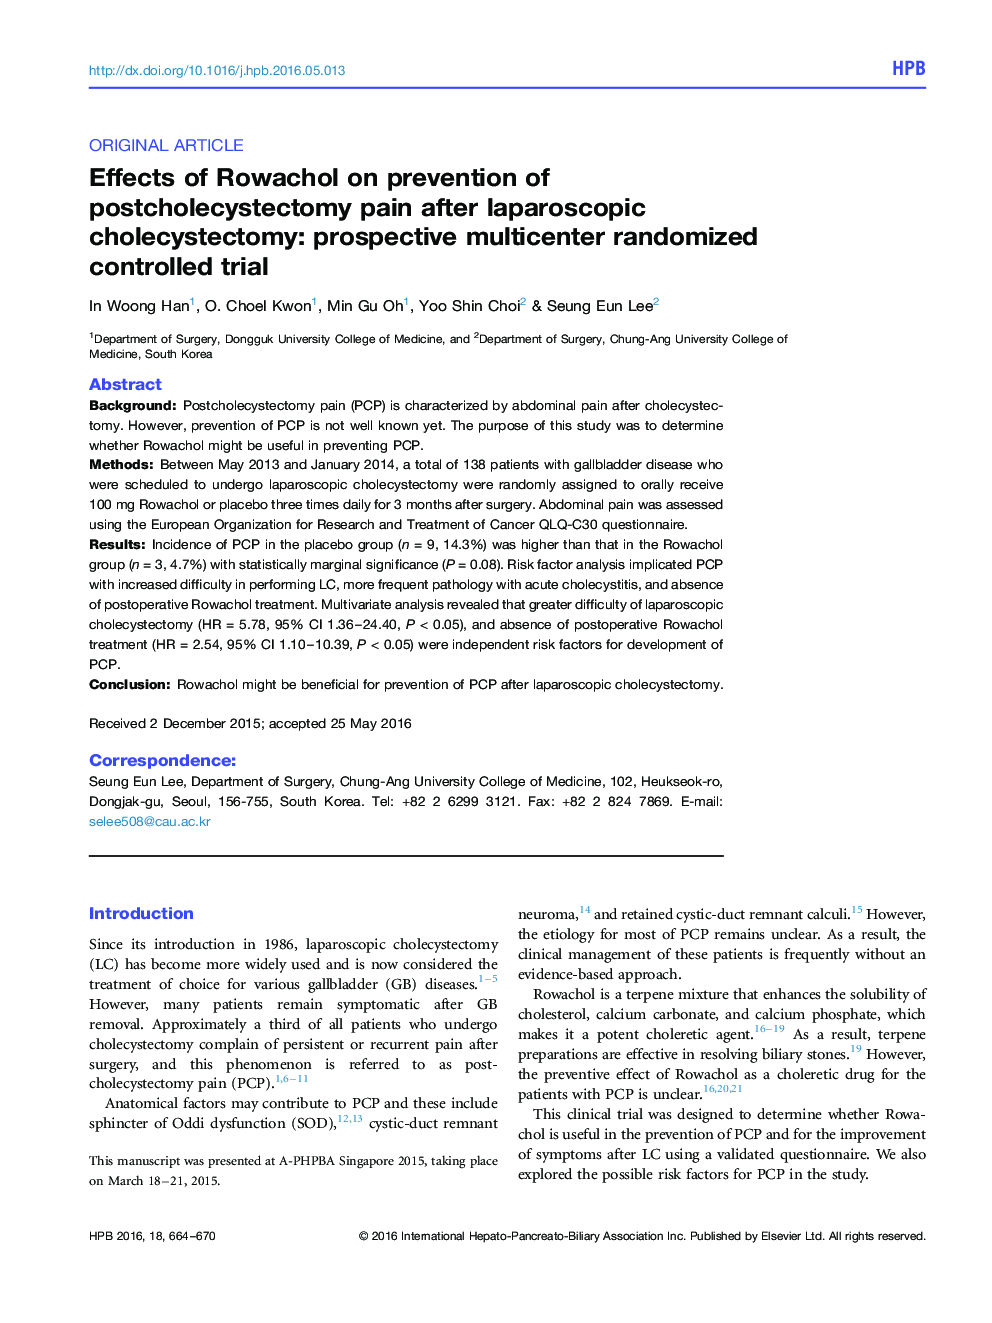 Effects of Rowachol on prevention of postcholecystectomy pain after laparoscopic cholecystectomy: prospective multicenter randomized controlled trial